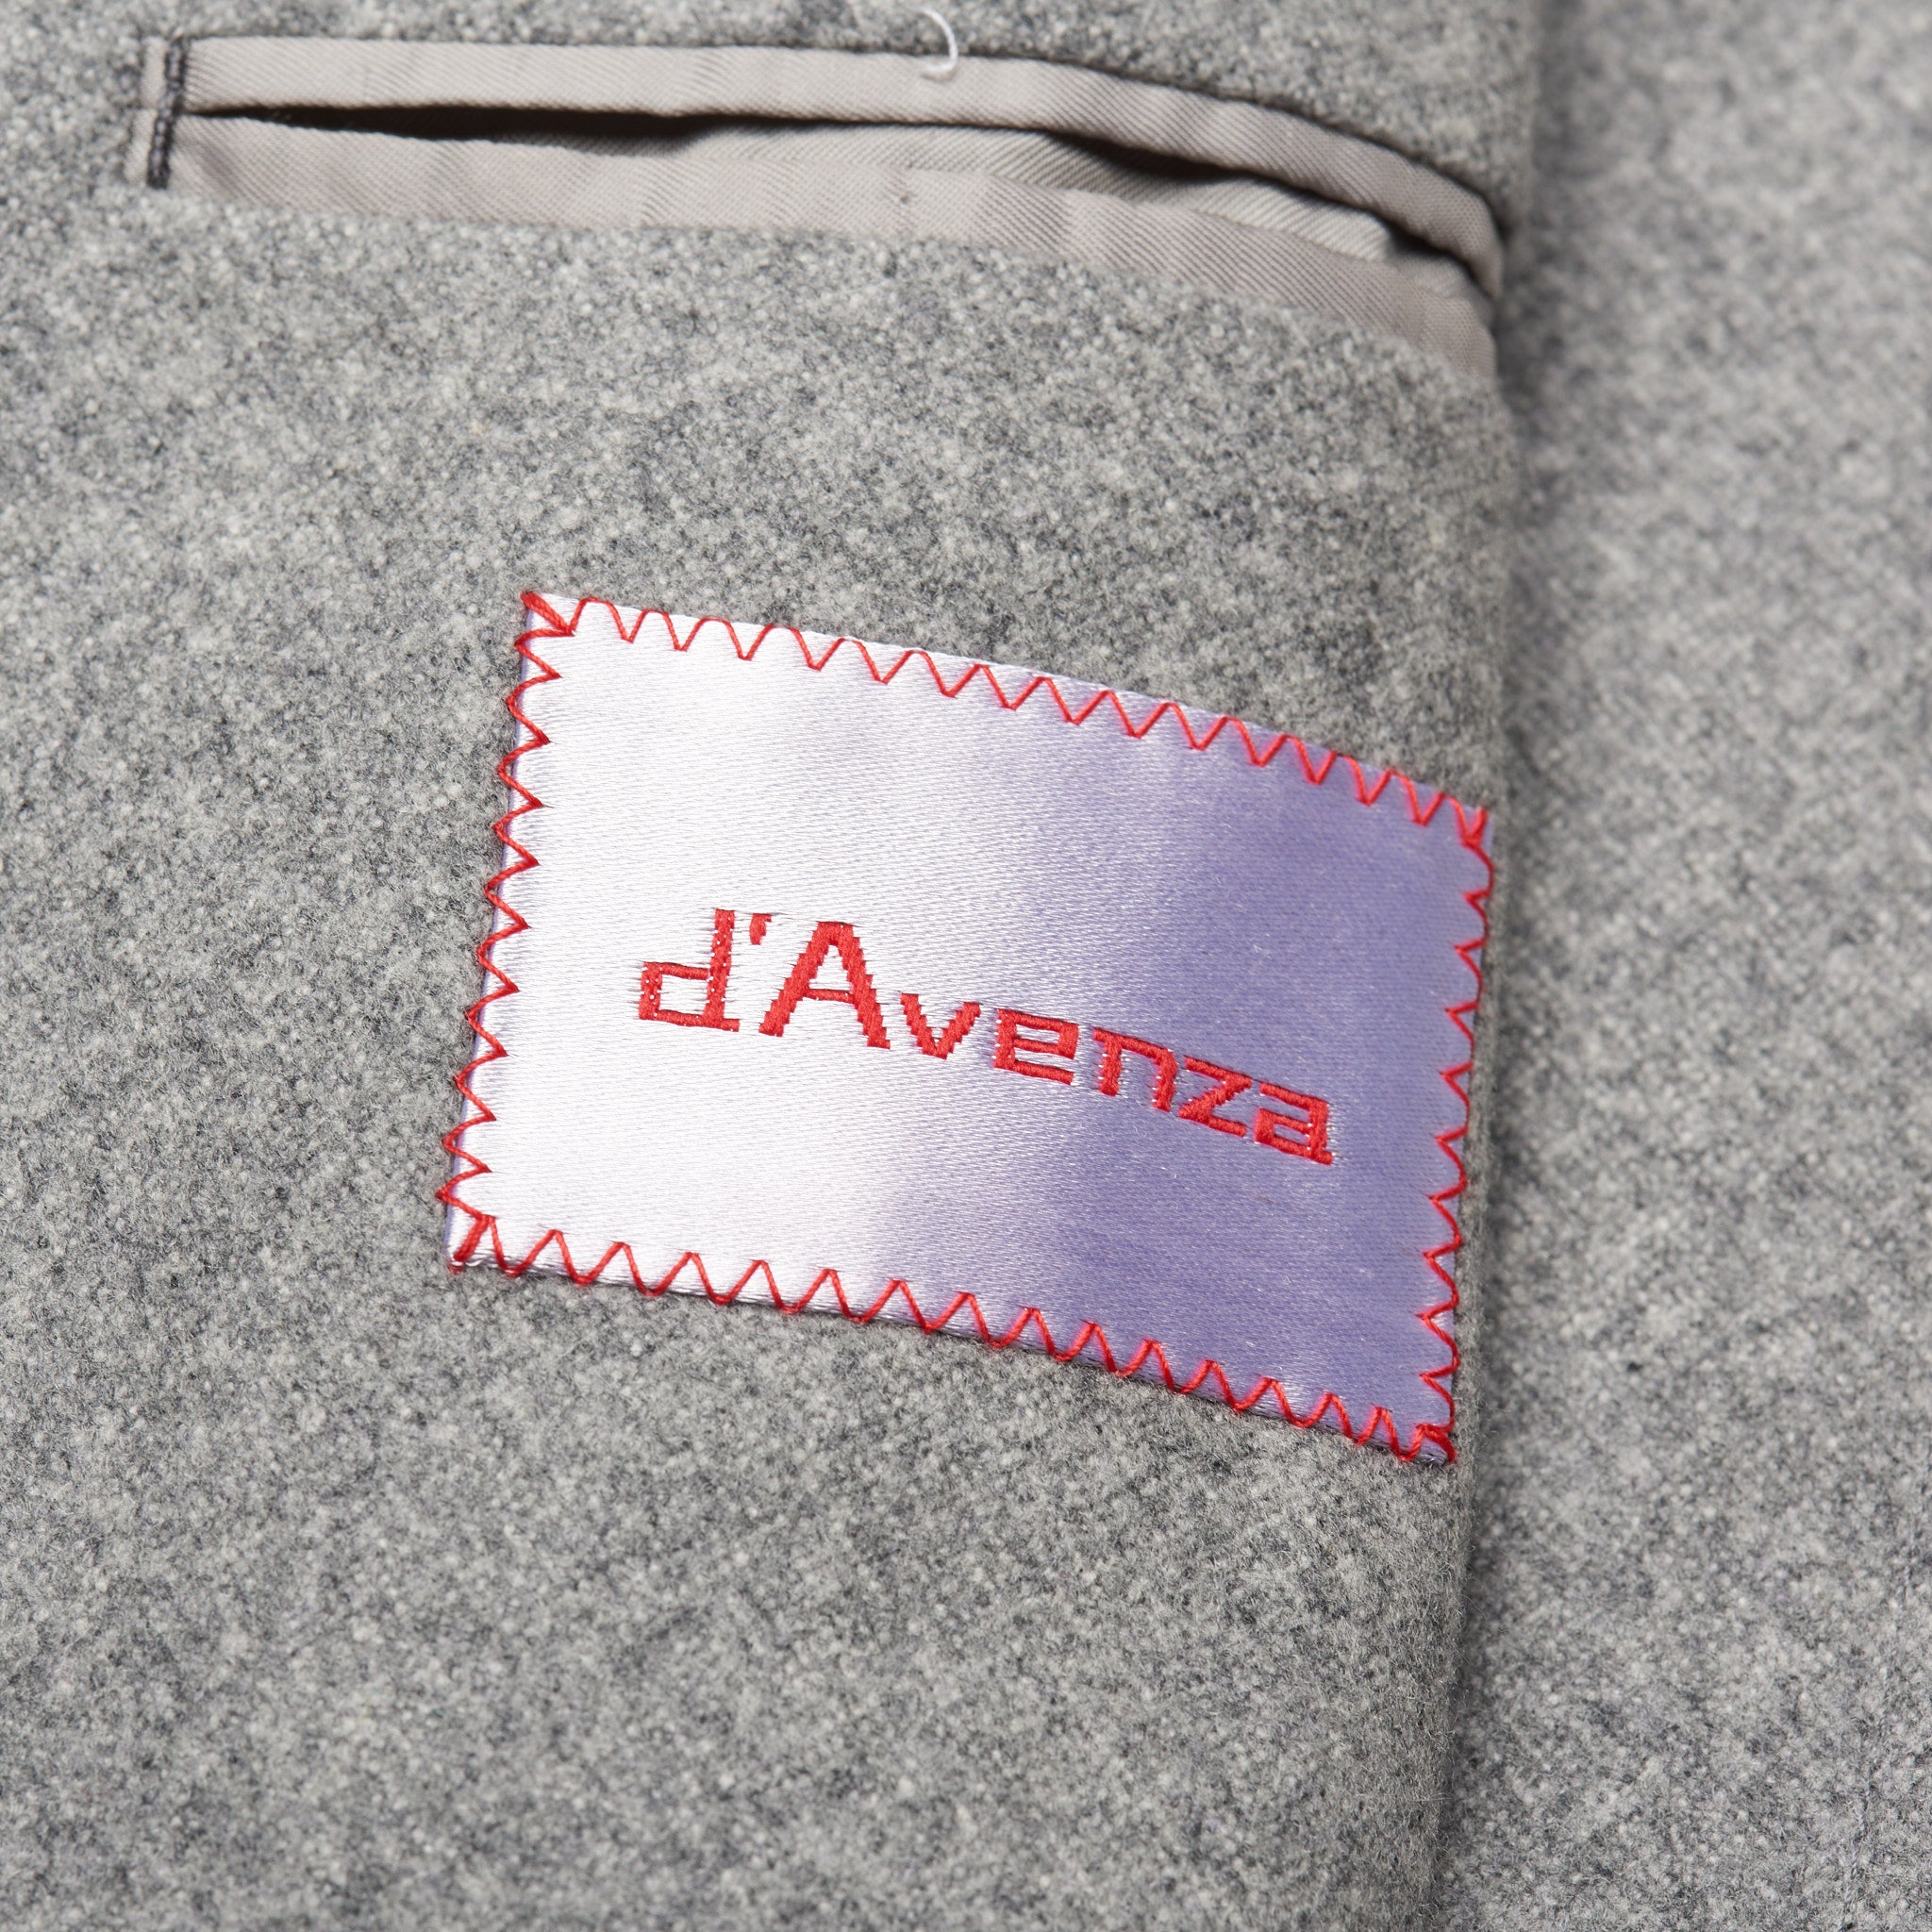 D'AVENZA Roma Handmade Gray Wool-Cashmere Unlined Flannel Suit 50 NEW US 40 D'AVENZA